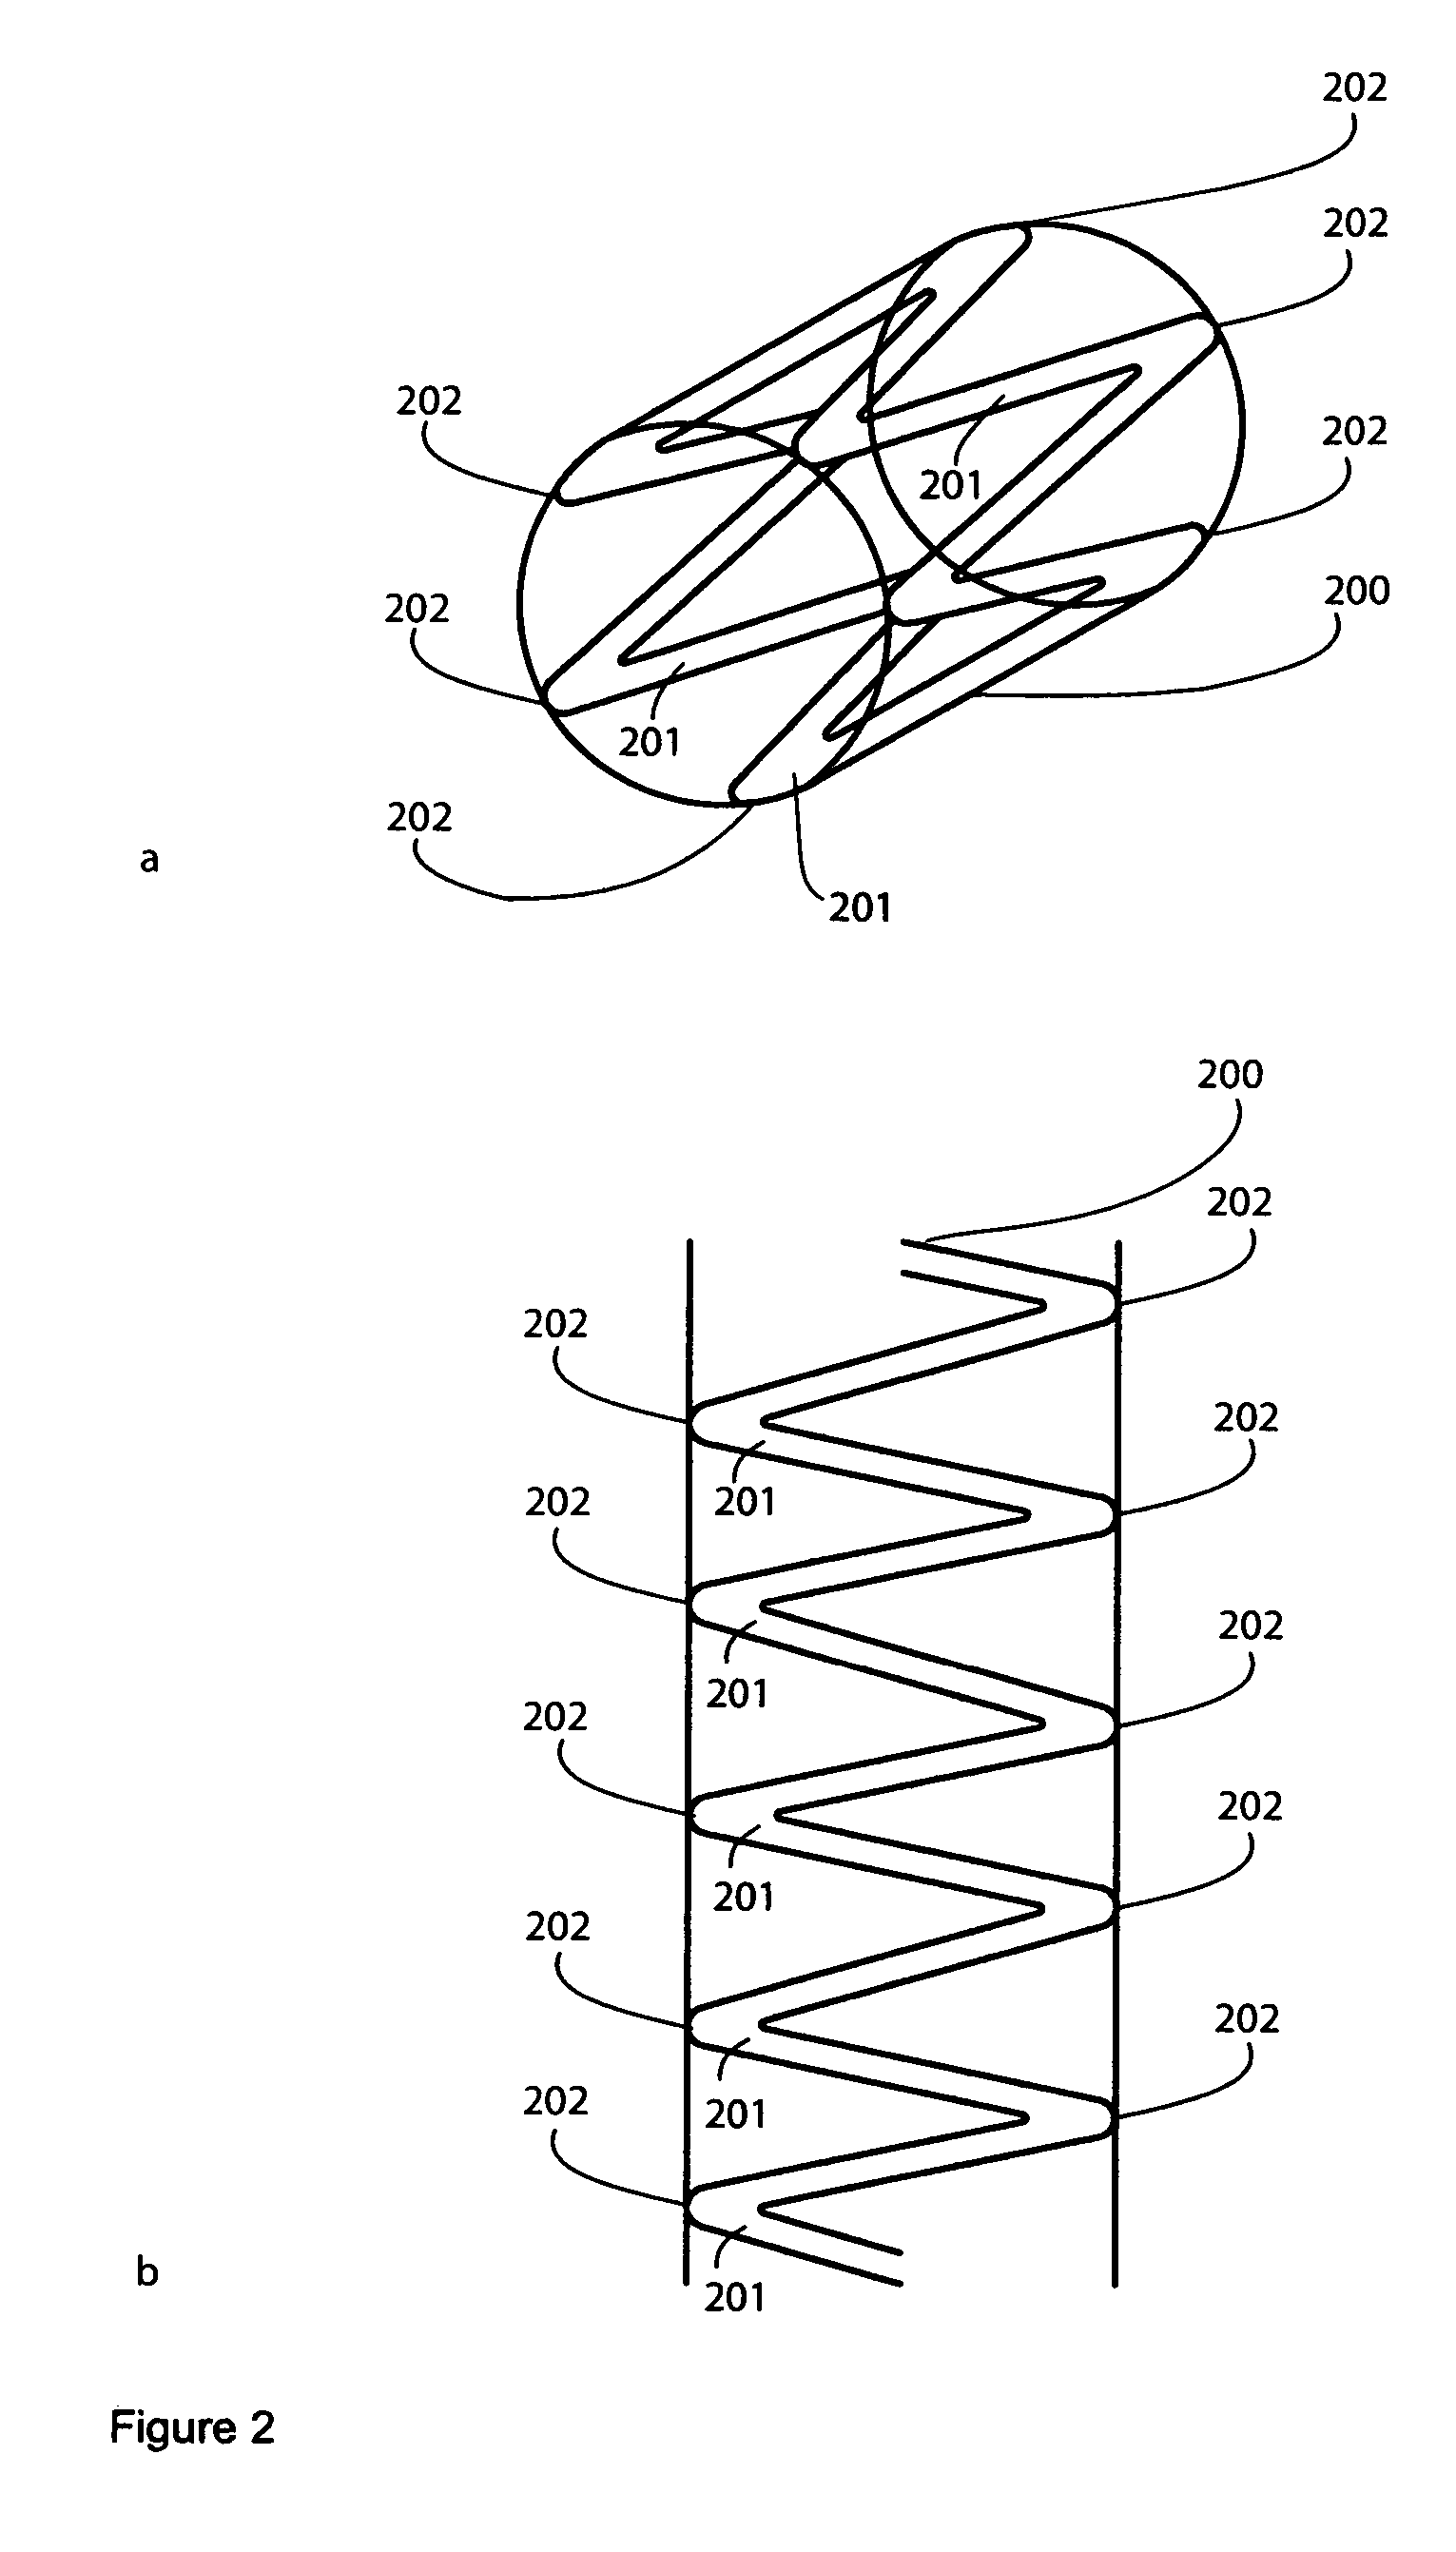 Device for the treatment and prevention of disease, and methods related thereto